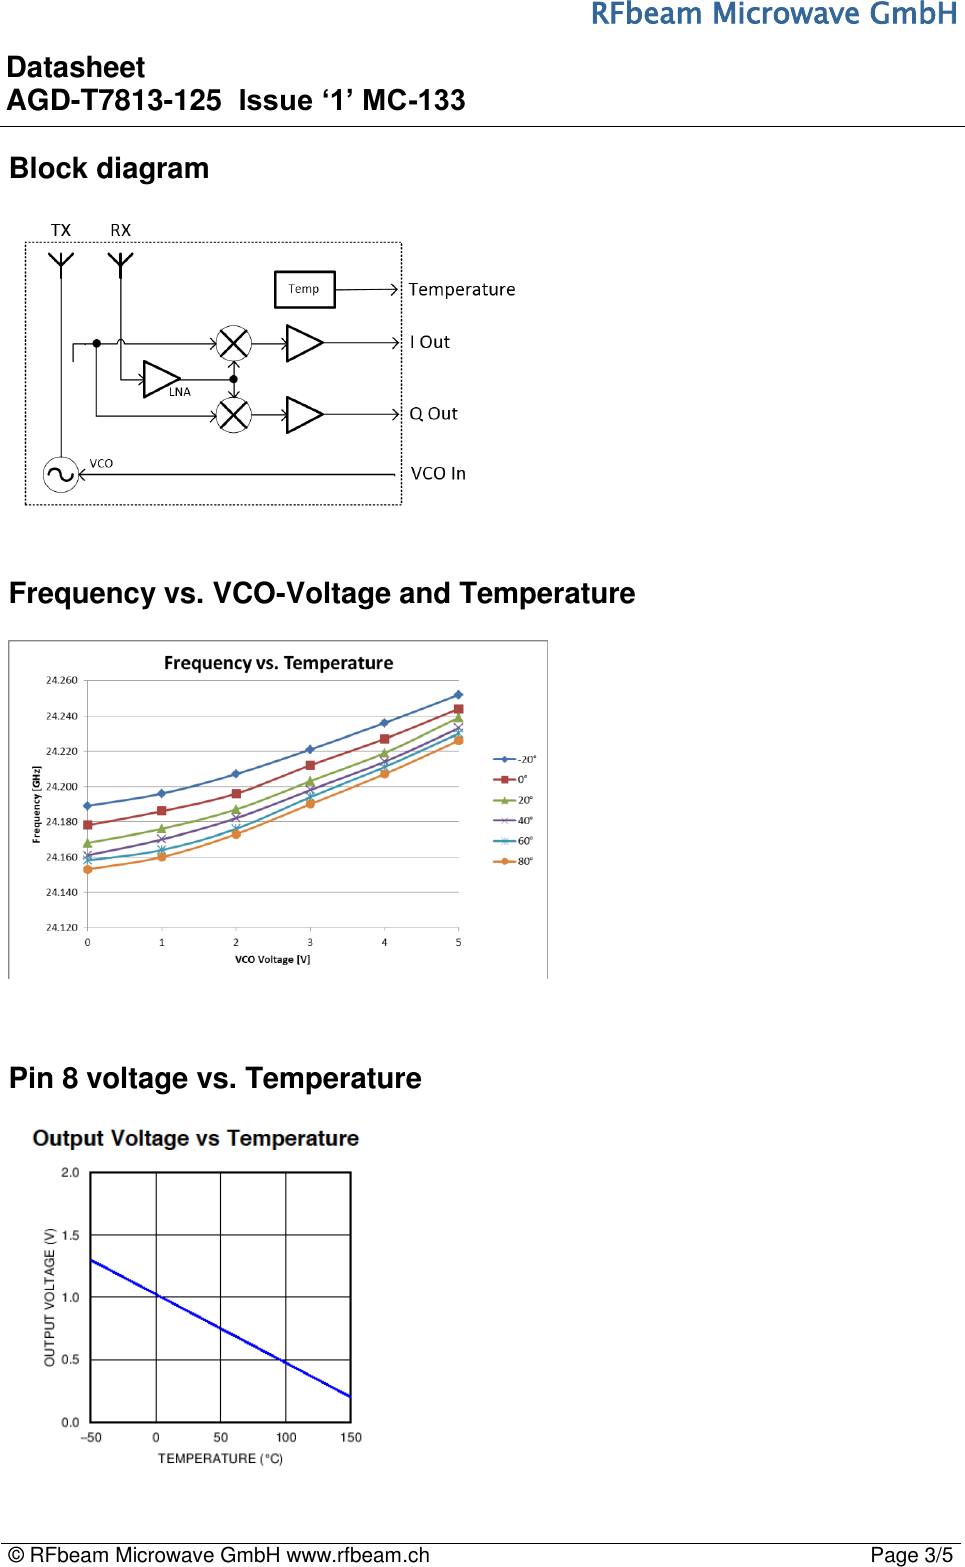 RFbeam Microwave GmbH © RFbeam Microwave GmbH www.rfbeam.ch Page 3/5Block diagram Frequency vs. VCO-Voltage and Temperature Pin 8 voltage vs. Temperature Datasheet AGD-T7813-125  Issue ‘1’ MC-133